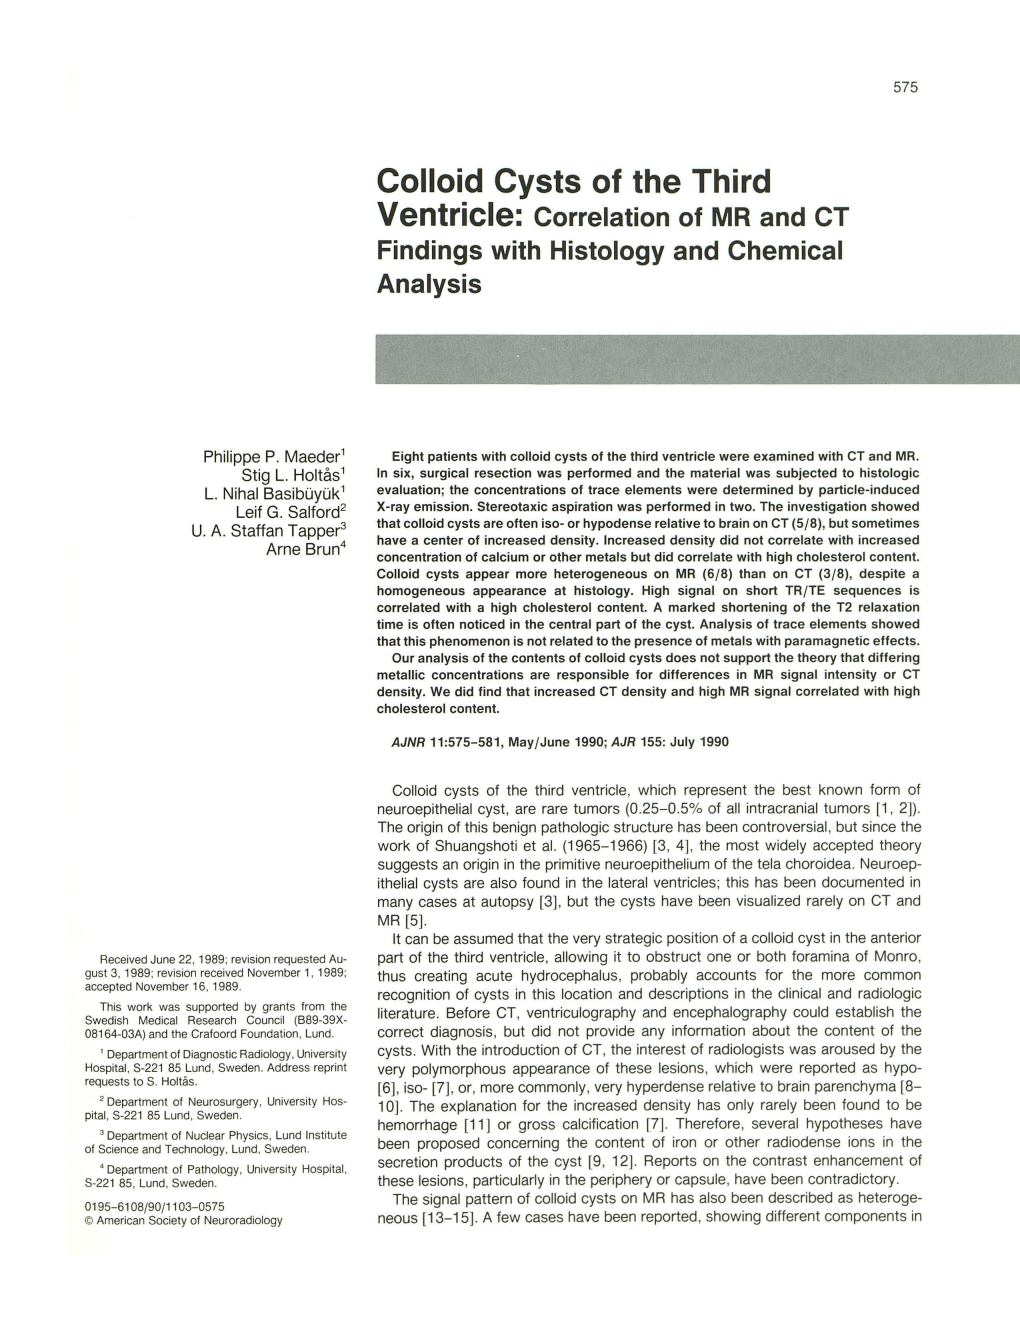 Colloid Cysts of the Third Ventricle: Correlation of MR and CT Findings with Histology and Chemical Analysis